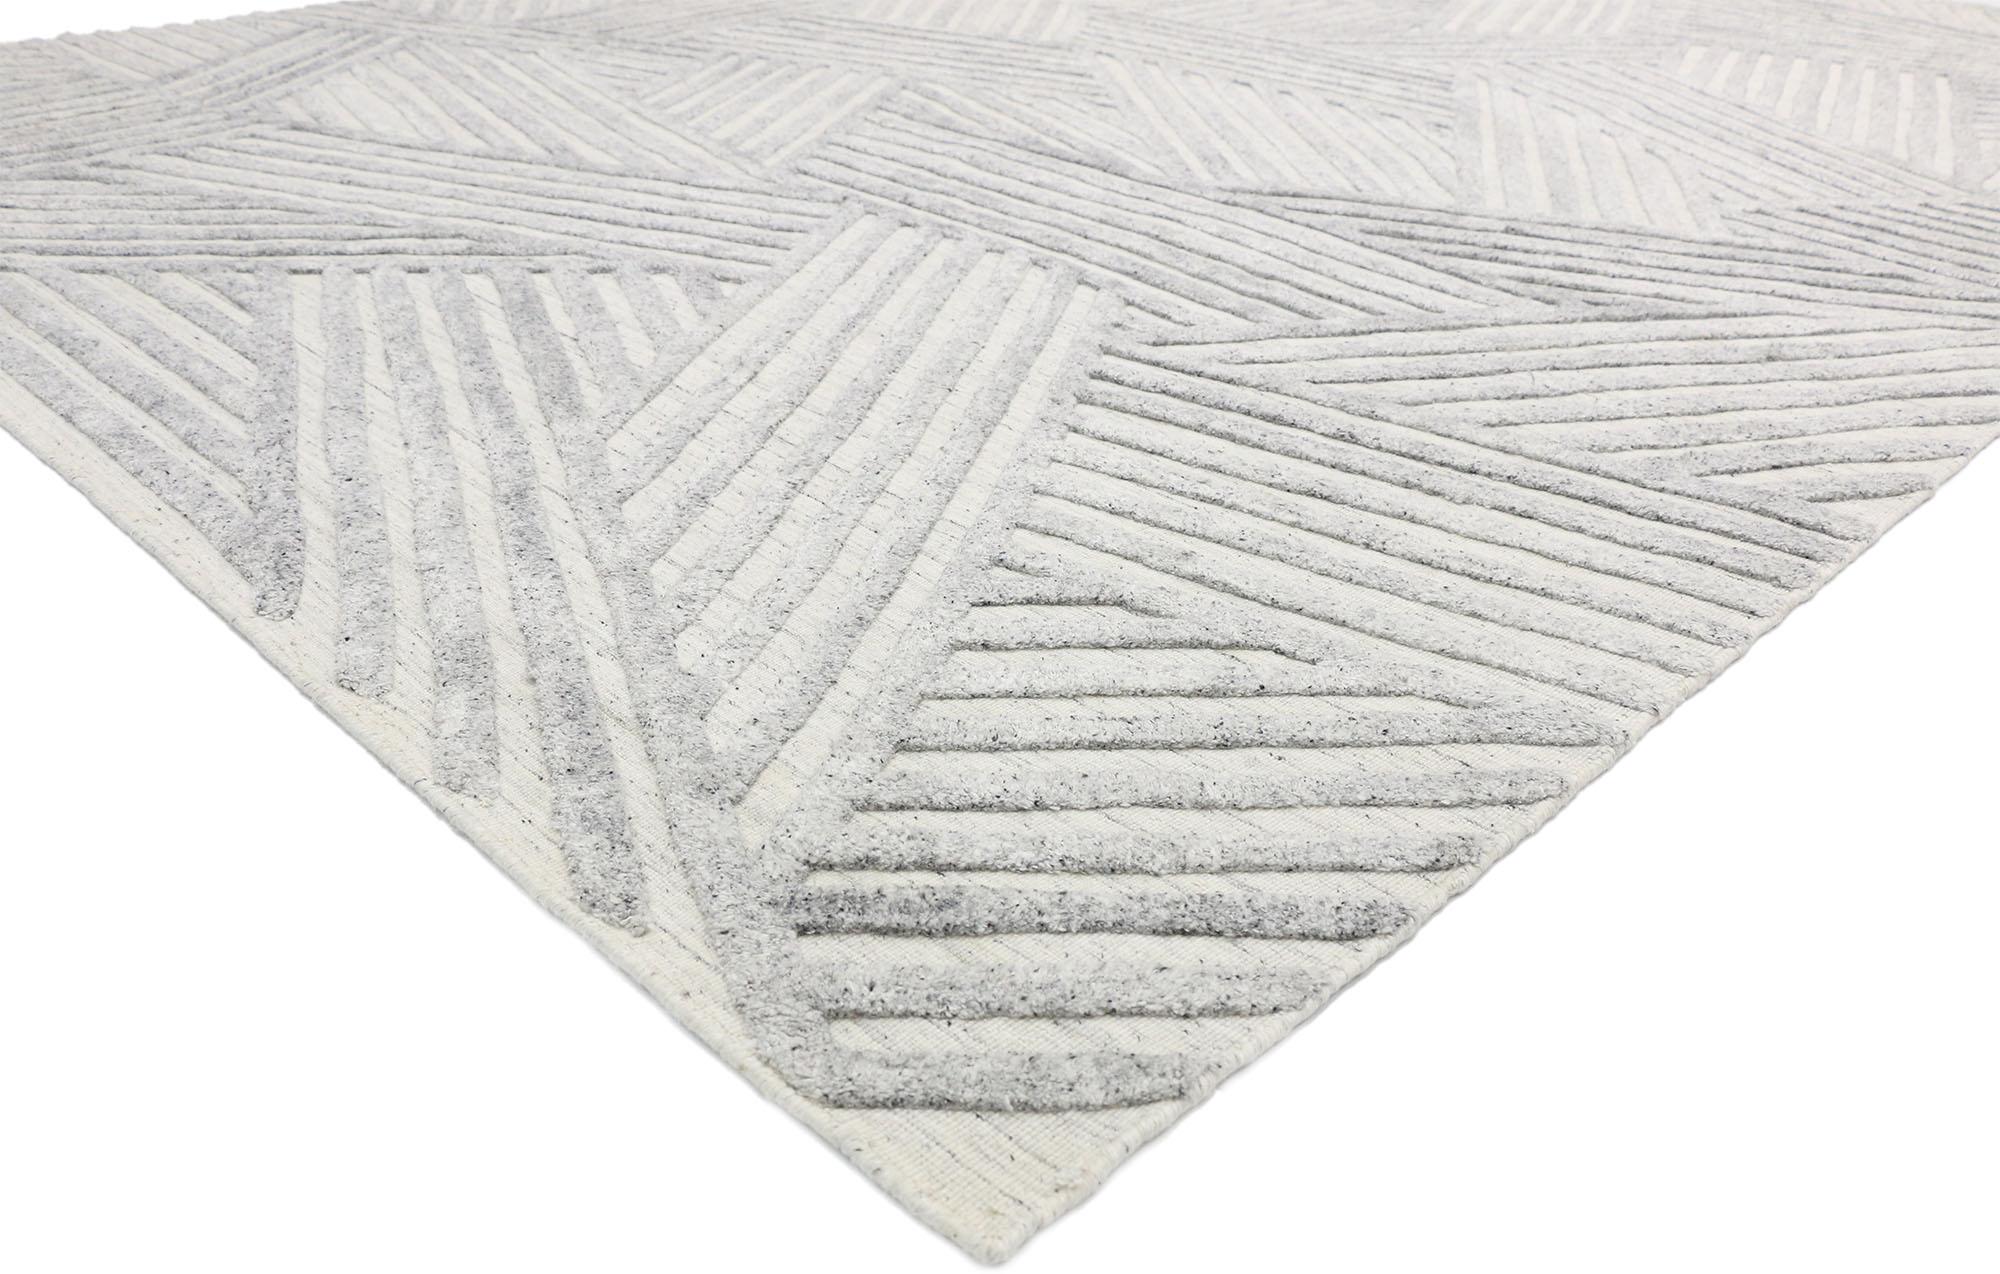 30422, contemporary area rug with Bauhaus style, texture area rug. Gray chic and sophisticated with a playful texture, this contemporary area rug showcases Bauhaus style with a plush modern twist. The raised design appears like a detailed woodblock